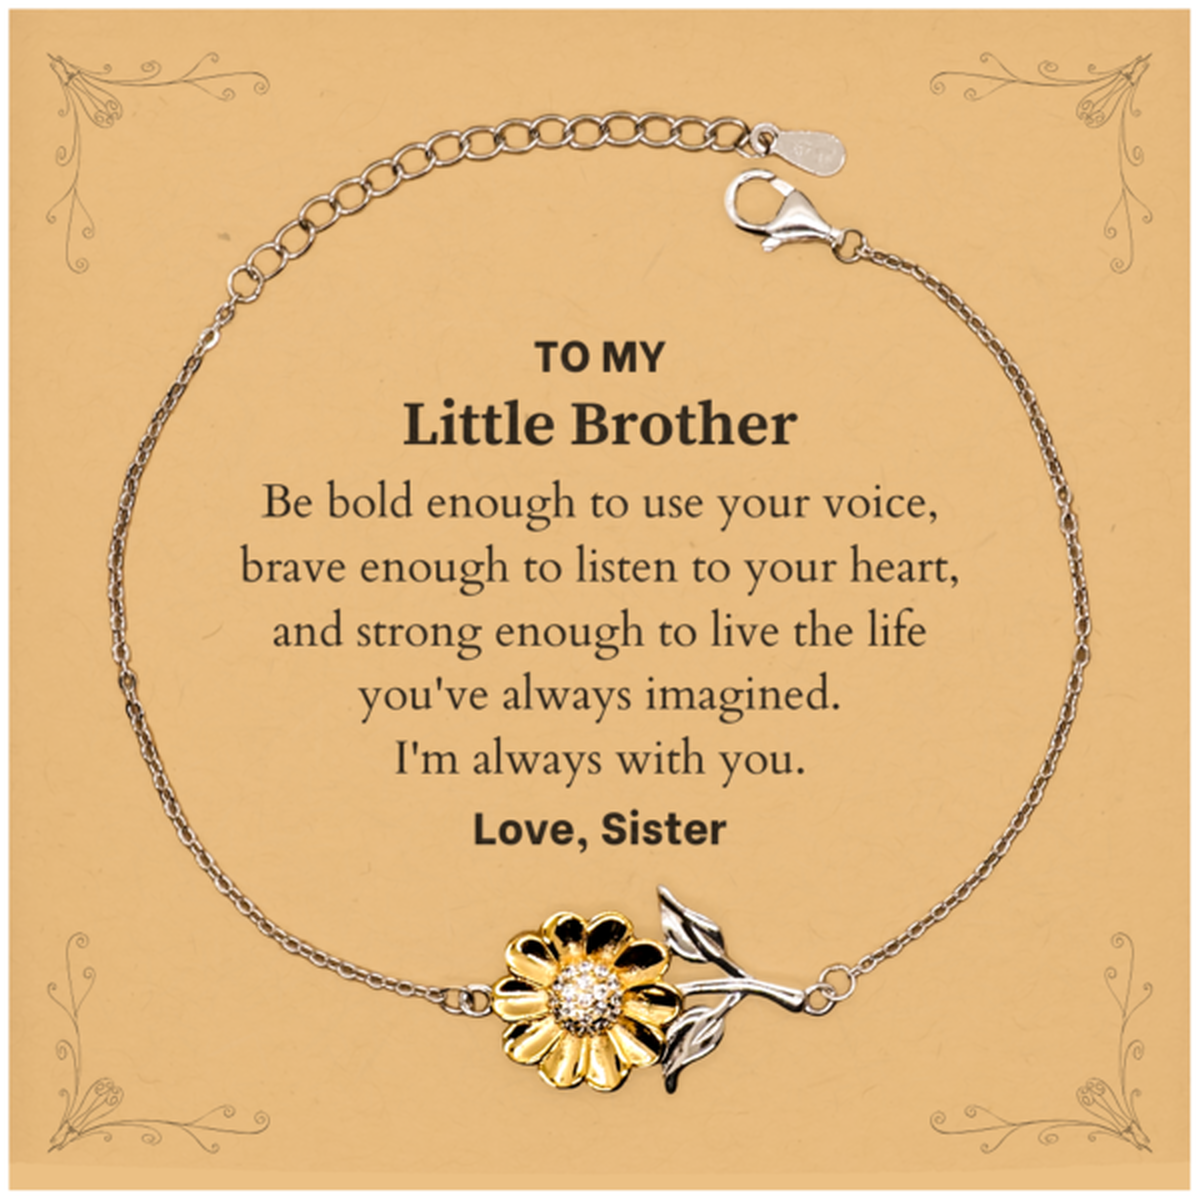 Keepsake Little Brother Sunflower Bracelet Gift Idea Graduation Christmas Birthday Little Brother from Sister, Little Brother Be bold enough to use your voice, brave enough to listen to your heart. Love, Sister